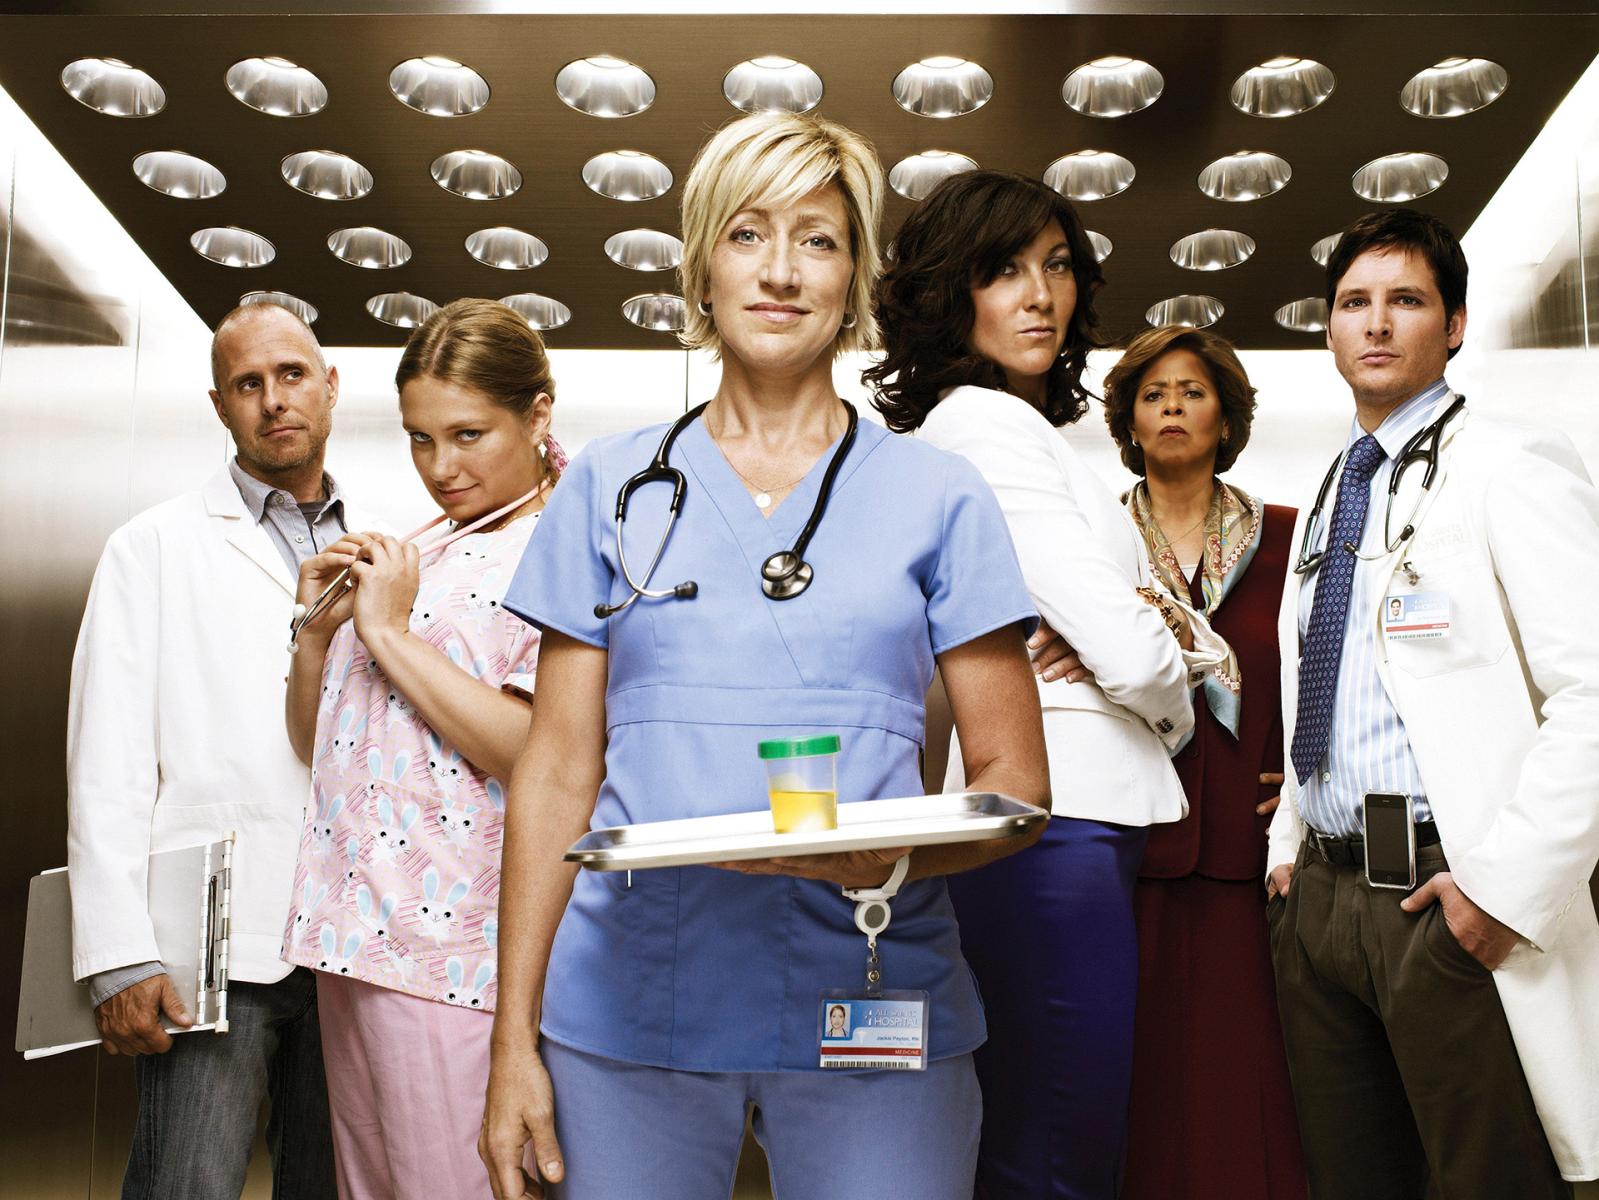 7 Medical Dramas That Don't Actually Make Us Want to Scream at the TV - image 7